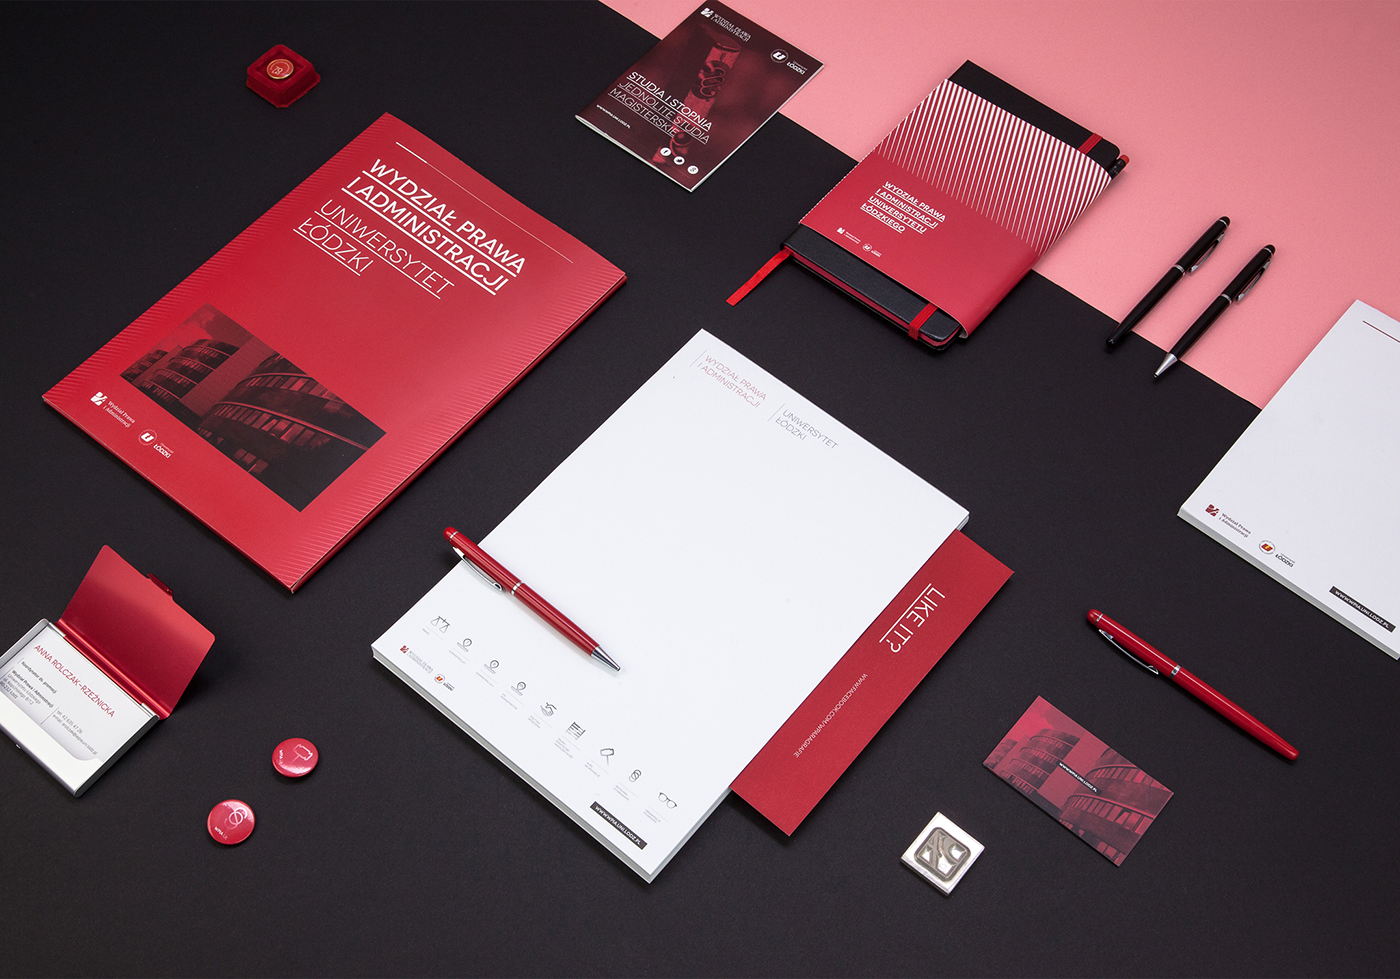 brand book visual visual identity corporate Corporate Identity business Stationery University lodz faculty school law administration brand